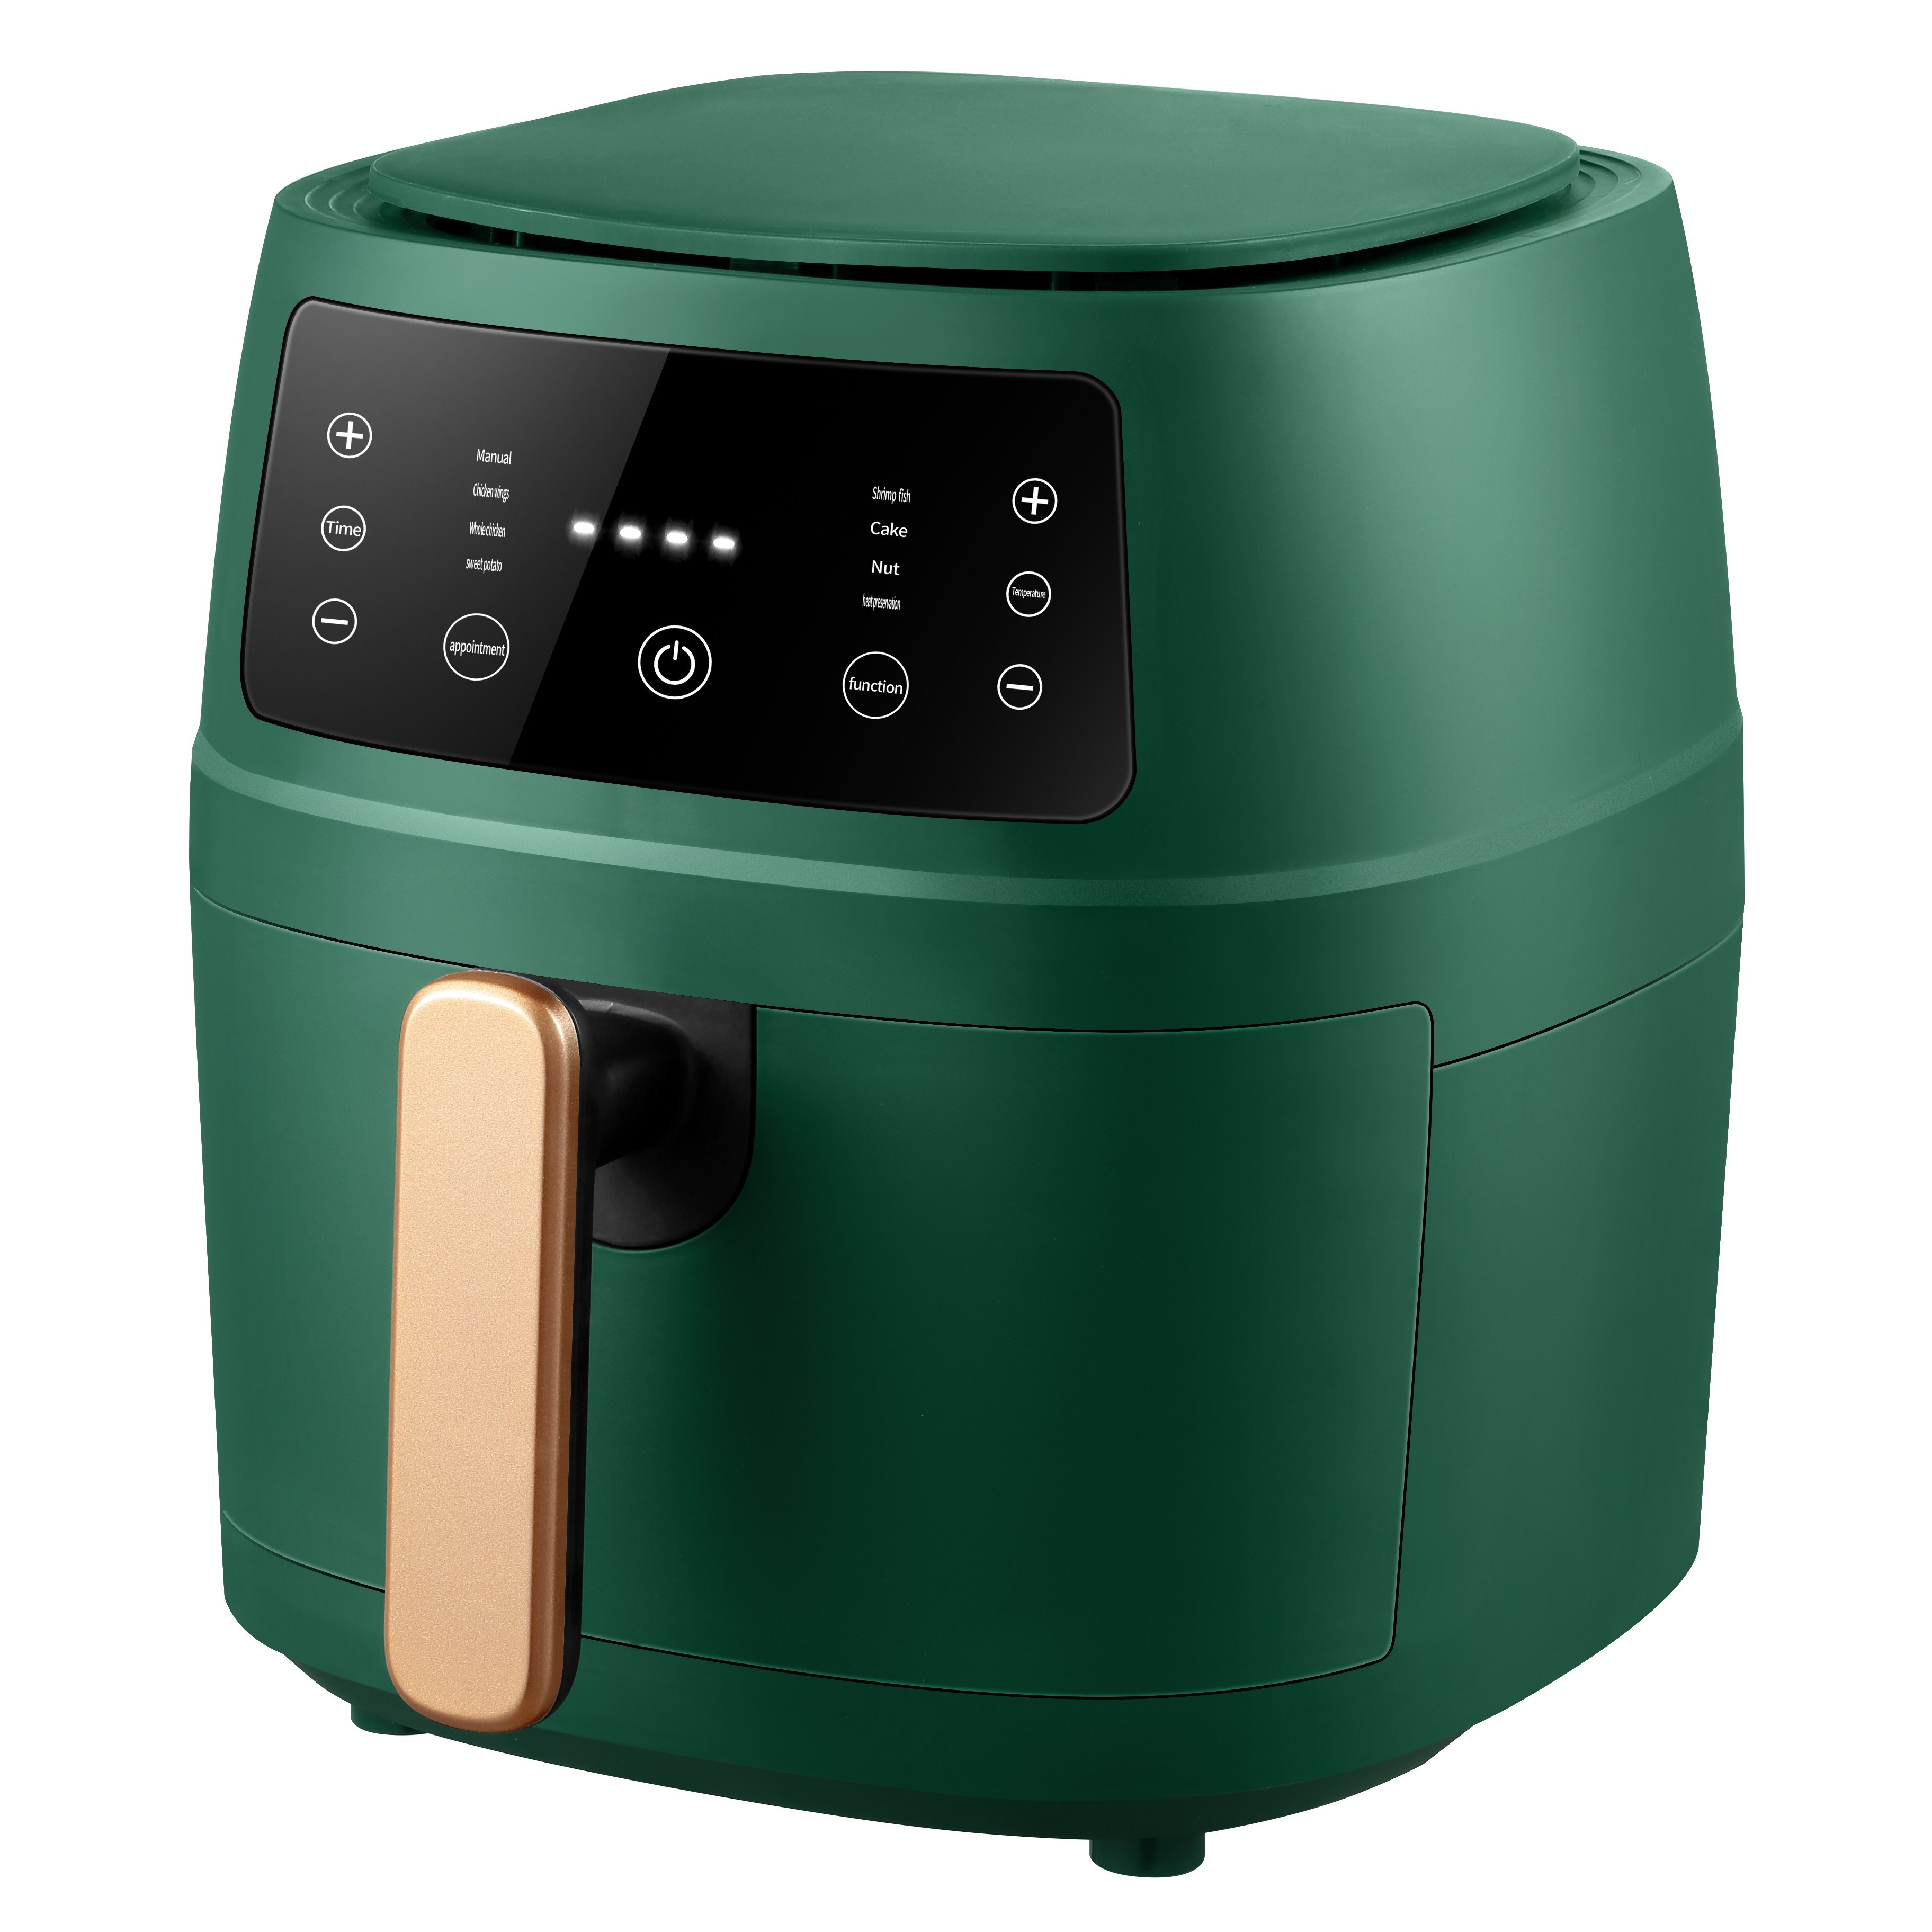  220v Air Fryer Household 3l/0.7 Gallon Multifunctional Oil-free  Electric Fryer Smart Air Fryer For Roasting,Baking-green : Home & Kitchen